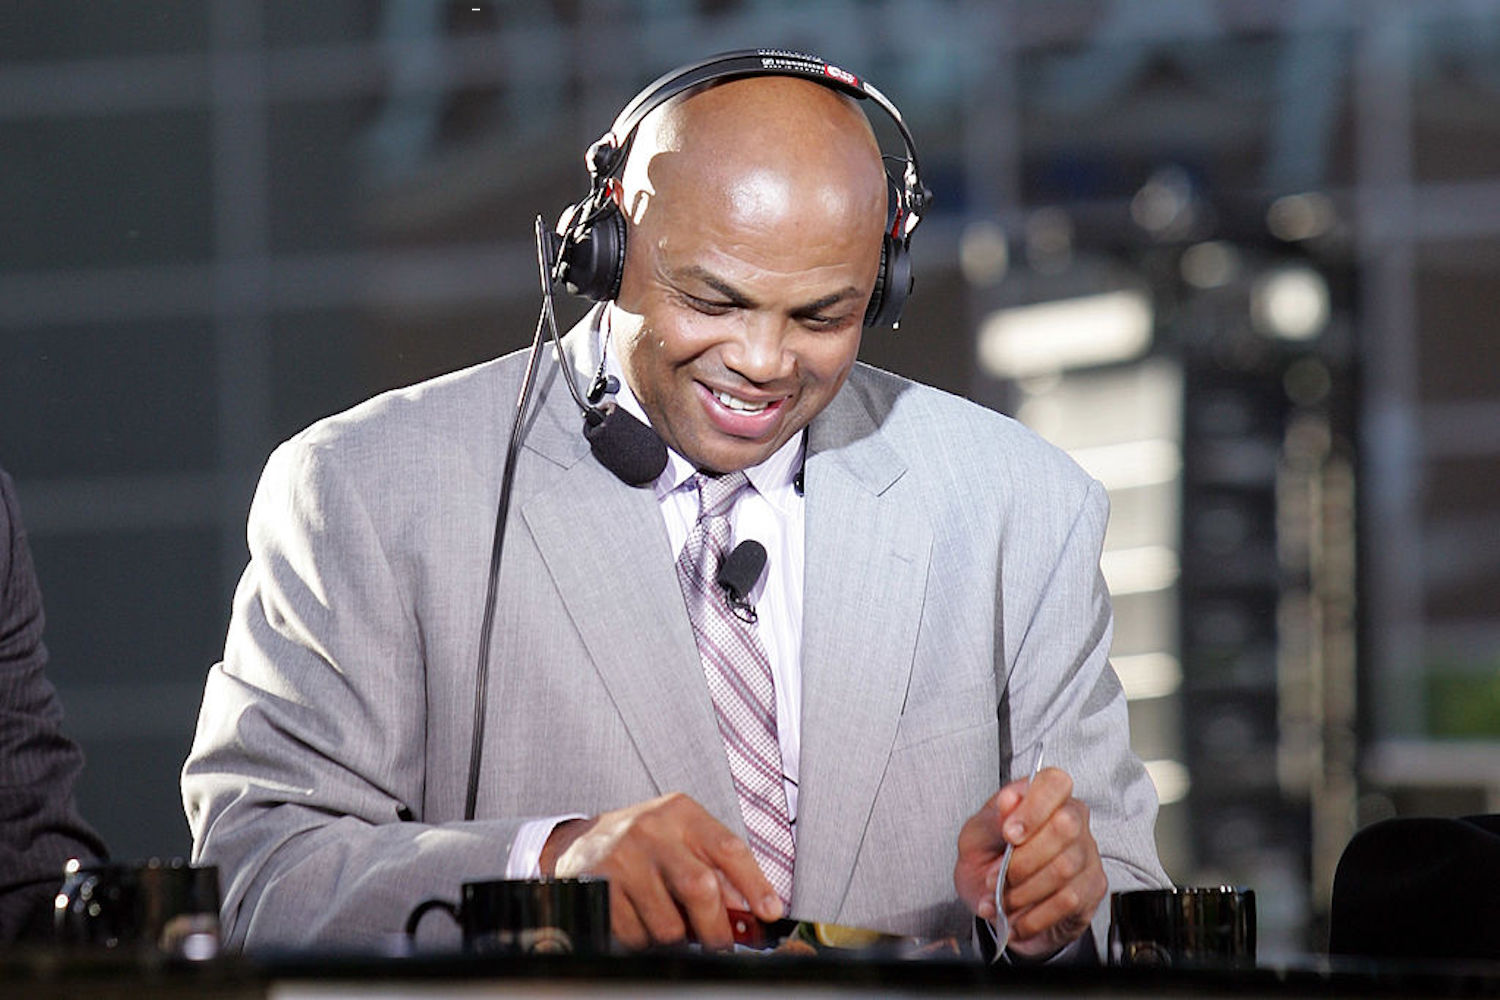 Charles Barkley was contemplating retirement in 2014, but TNT persuaded him to re-sign with $1,700 worth of wine and tequila.